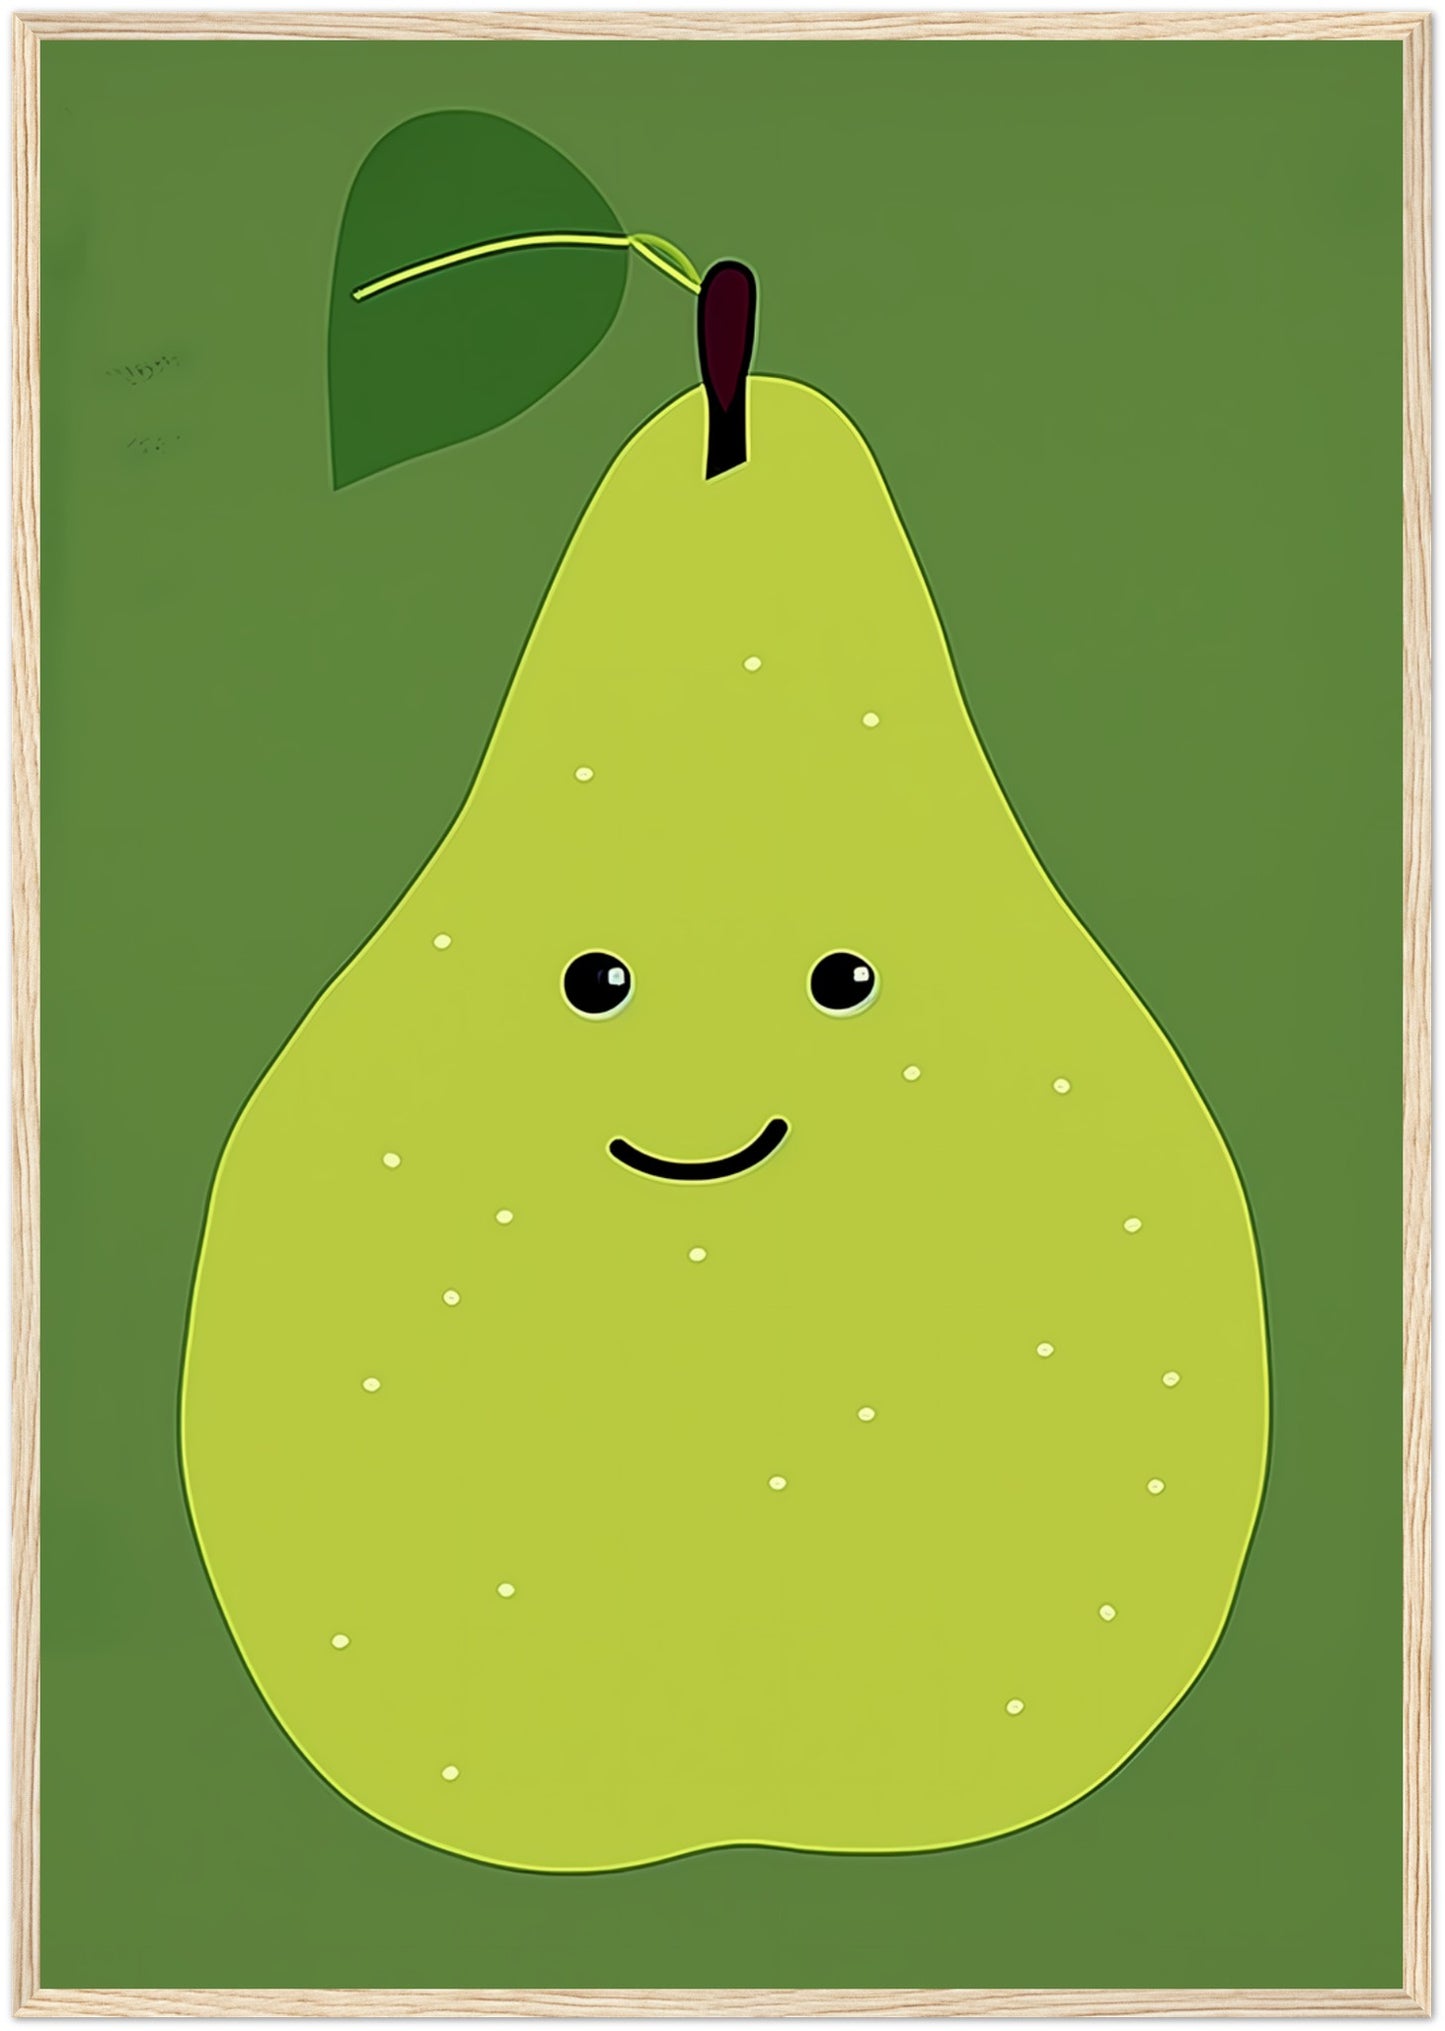 A framed illustration of a smiling pear with a leaf and stem.